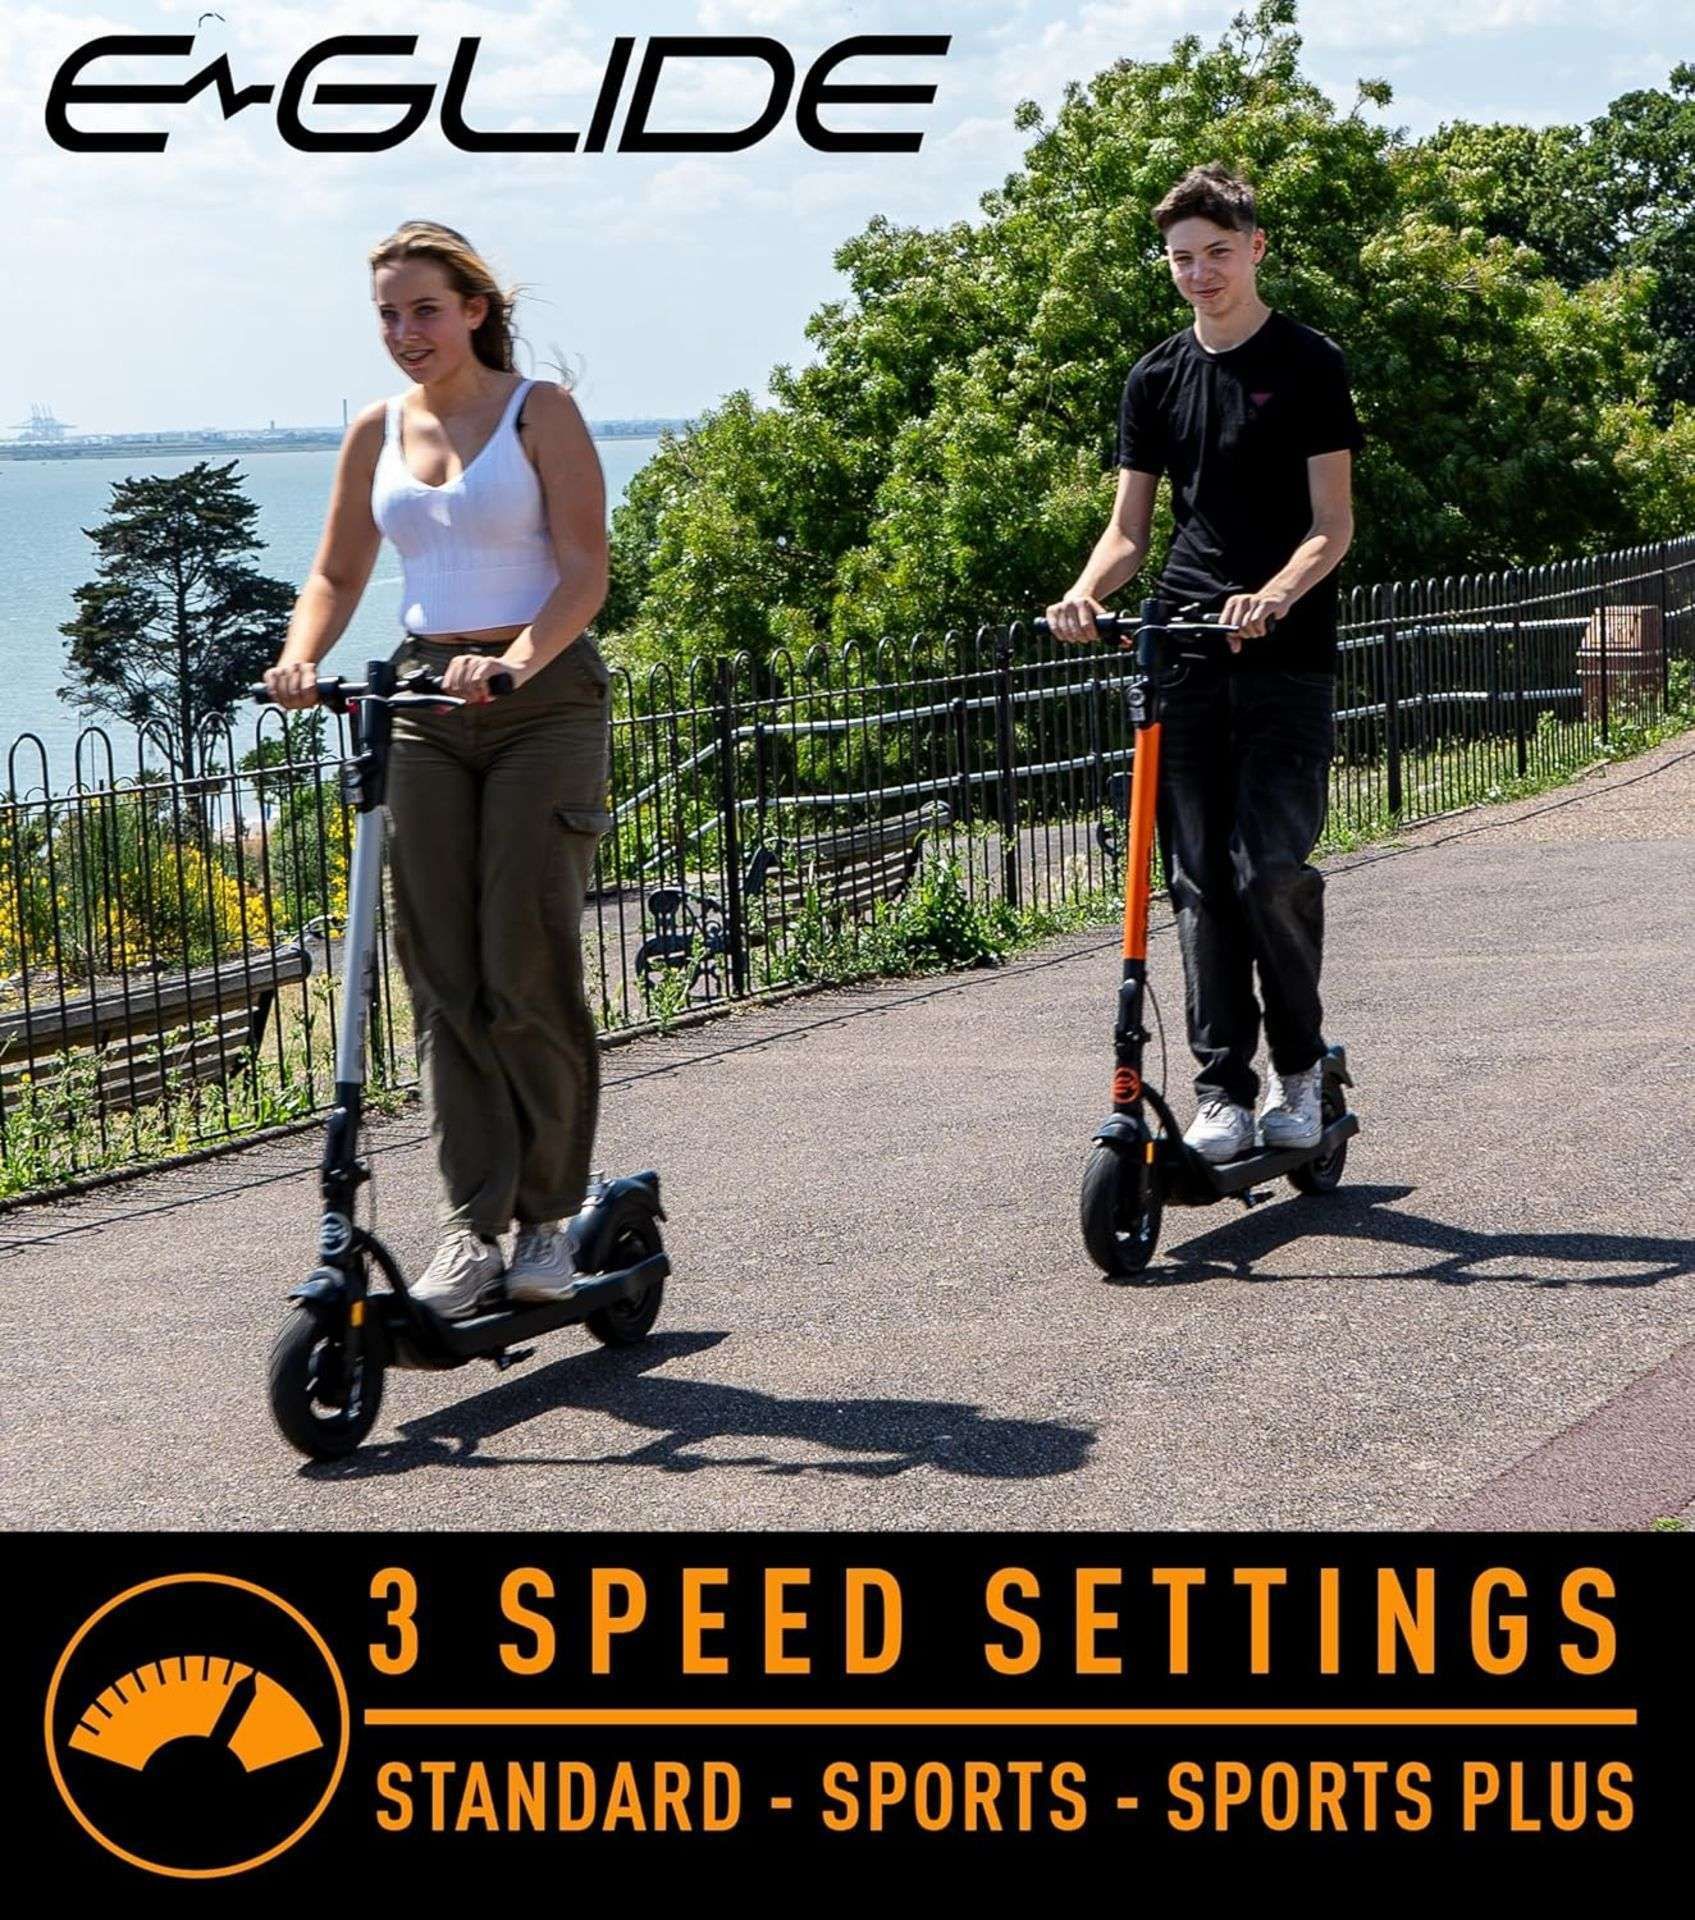 Brand New E-Glide V2 Electric Scooter Orange and Black RRP £599, Introducing a sleek and efficient - Bild 5 aus 5